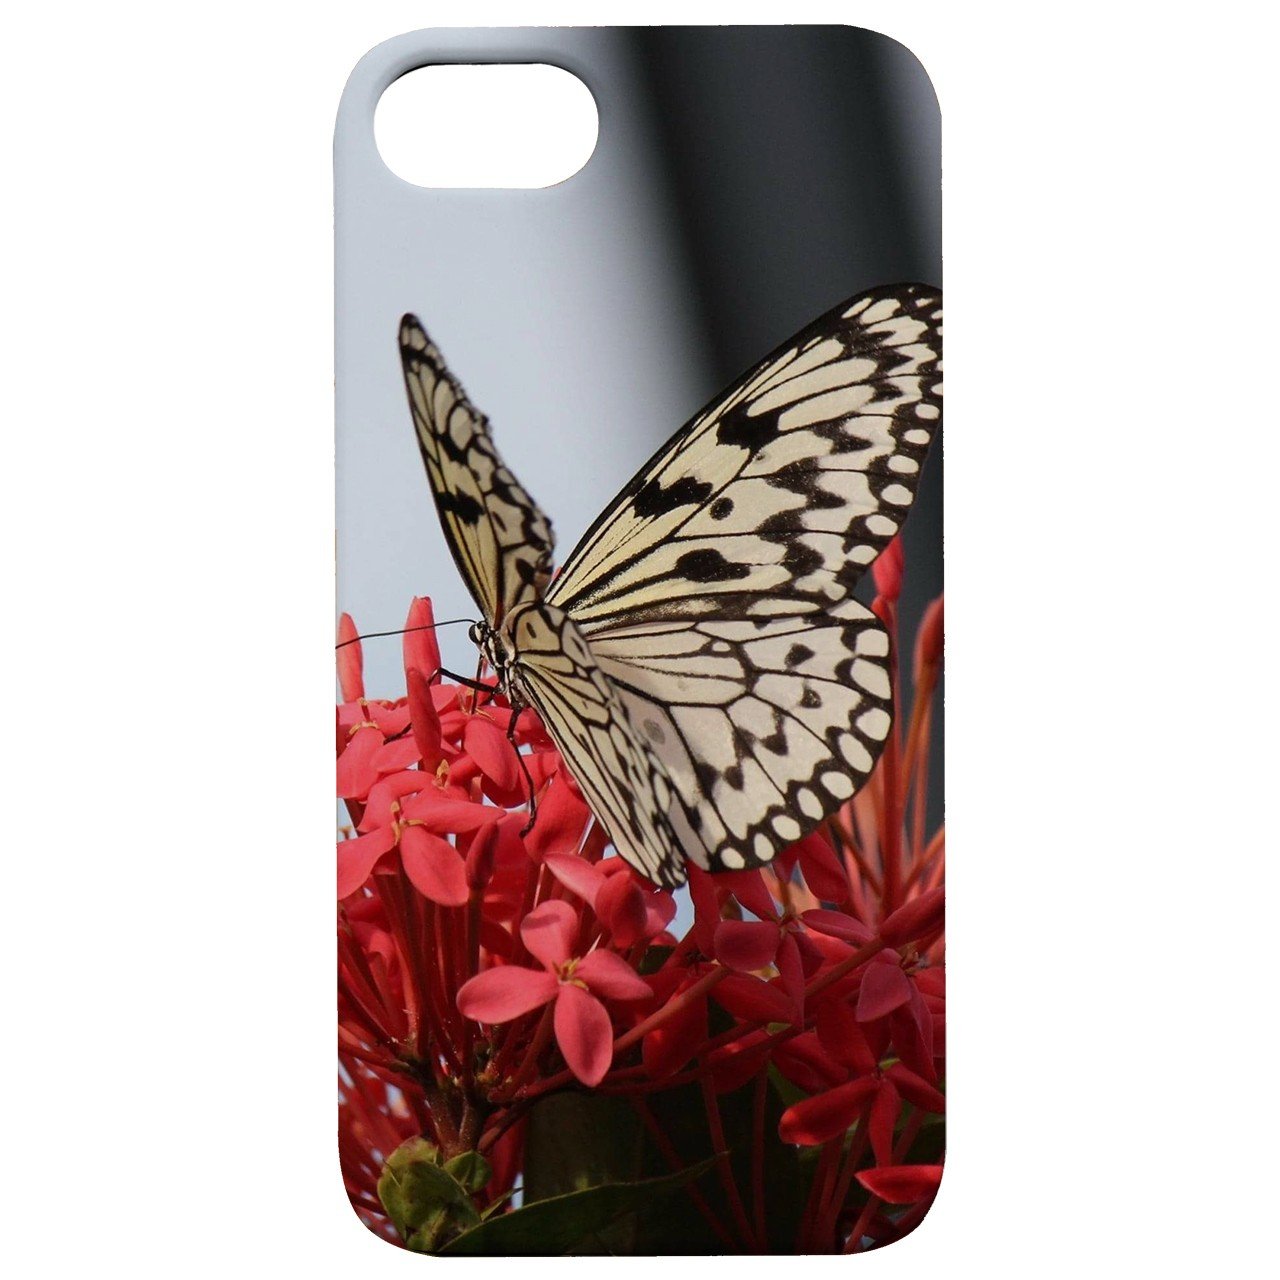 Butterfly - UV Color Printed - Wooden Phone Case